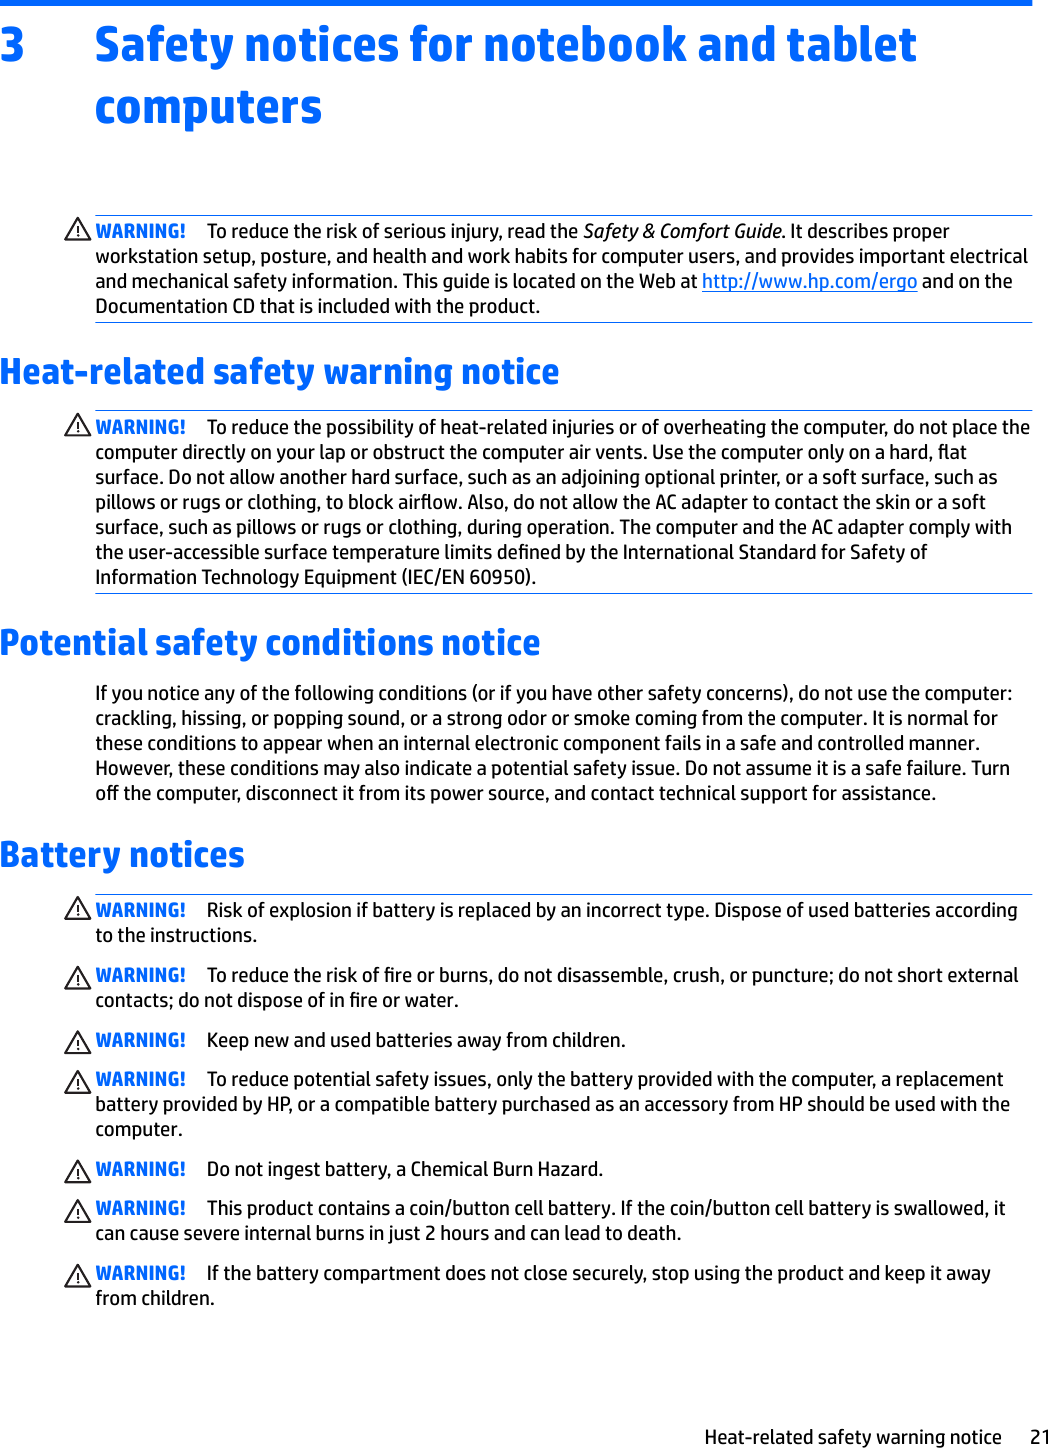 3 Safety notices for notebook and tablet computersWARNING! To reduce the risk of serious injury, read the Safety &amp; Comfort Guide. It describes proper workstation setup, posture, and health and work habits for computer users, and provides important electrical and mechanical safety information. This guide is located on the Web at http://www.hp.com/ergo and on the Documentation CD that is included with the product.Heat-related safety warning noticeWARNING! To reduce the possibility of heat-related injuries or of overheating the computer, do not place the computer directly on your lap or obstruct the computer air vents. Use the computer only on a hard, at surface. Do not allow another hard surface, such as an adjoining optional printer, or a soft surface, such as pillows or rugs or clothing, to block airow. Also, do not allow the AC adapter to contact the skin or a soft surface, such as pillows or rugs or clothing, during operation. The computer and the AC adapter comply with the user-accessible surface temperature limits dened by the International Standard for Safety of Information Technology Equipment (IEC/EN 60950).Potential safety conditions noticeIf you notice any of the following conditions (or if you have other safety concerns), do not use the computer: crackling, hissing, or popping sound, or a strong odor or smoke coming from the computer. It is normal for these conditions to appear when an internal electronic component fails in a safe and controlled manner. However, these conditions may also indicate a potential safety issue. Do not assume it is a safe failure. Turn o the computer, disconnect it from its power source, and contact technical support for assistance.Battery noticesWARNING! Risk of explosion if battery is replaced by an incorrect type. Dispose of used batteries according to the instructions.WARNING! To reduce the risk of re or burns, do not disassemble, crush, or puncture; do not short external contacts; do not dispose of in re or water.WARNING! Keep new and used batteries away from children.WARNING! To reduce potential safety issues, only the battery provided with the computer, a replacement battery provided by HP, or a compatible battery purchased as an accessory from HP should be used with the computer.WARNING! Do not ingest battery, a Chemical Burn Hazard.WARNING! This product contains a coin/button cell battery. If the coin/button cell battery is swallowed, it can cause severe internal burns in just 2 hours and can lead to death.WARNING! If the battery compartment does not close securely, stop using the product and keep it away from children.Heat-related safety warning notice 21